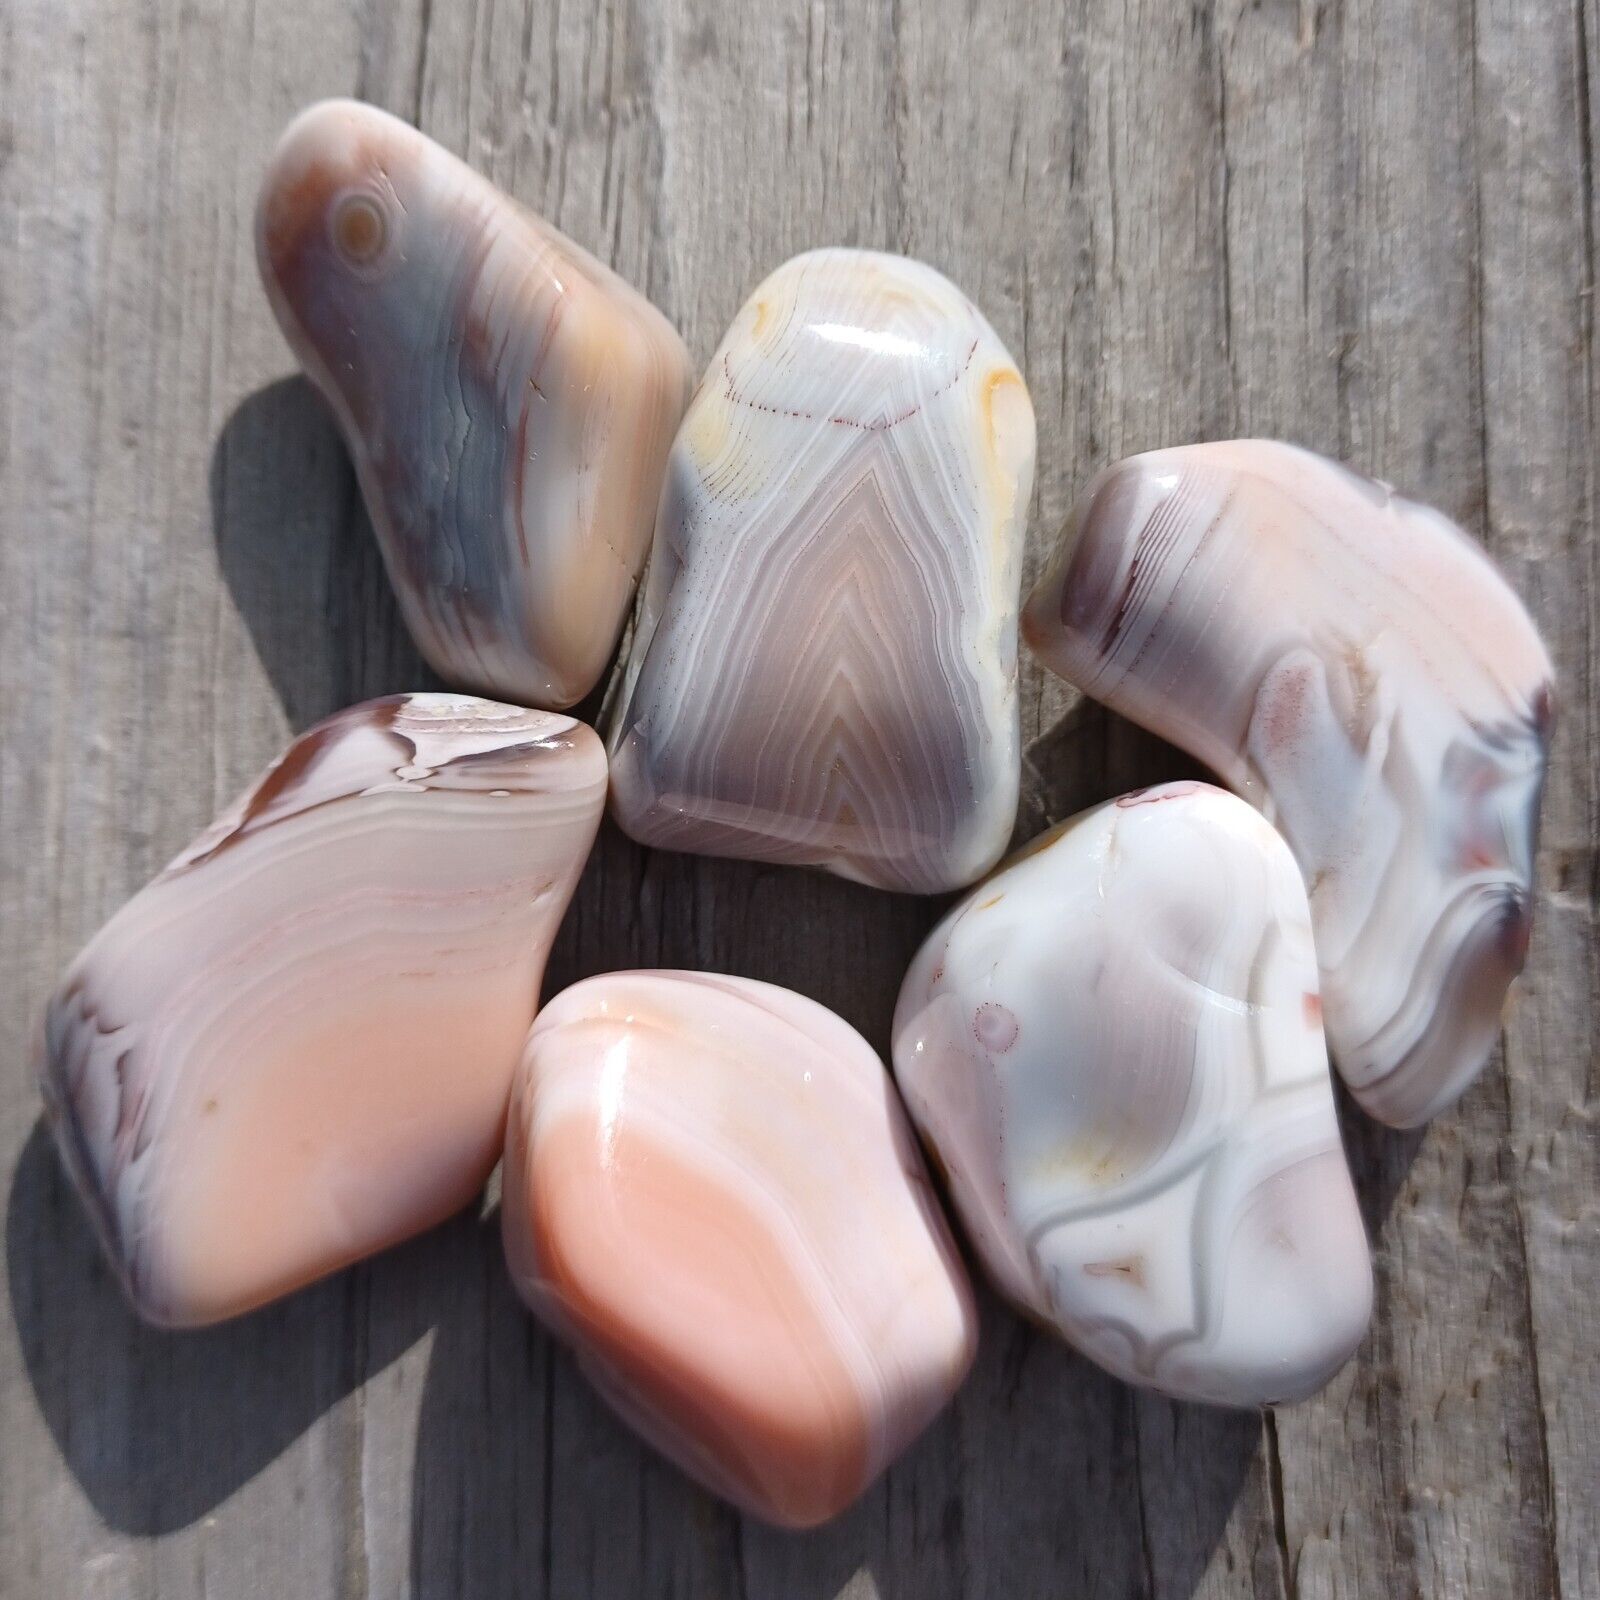 Peach gray Botswana Agates 6 pieces gorgeous 1 inch tumbled polished